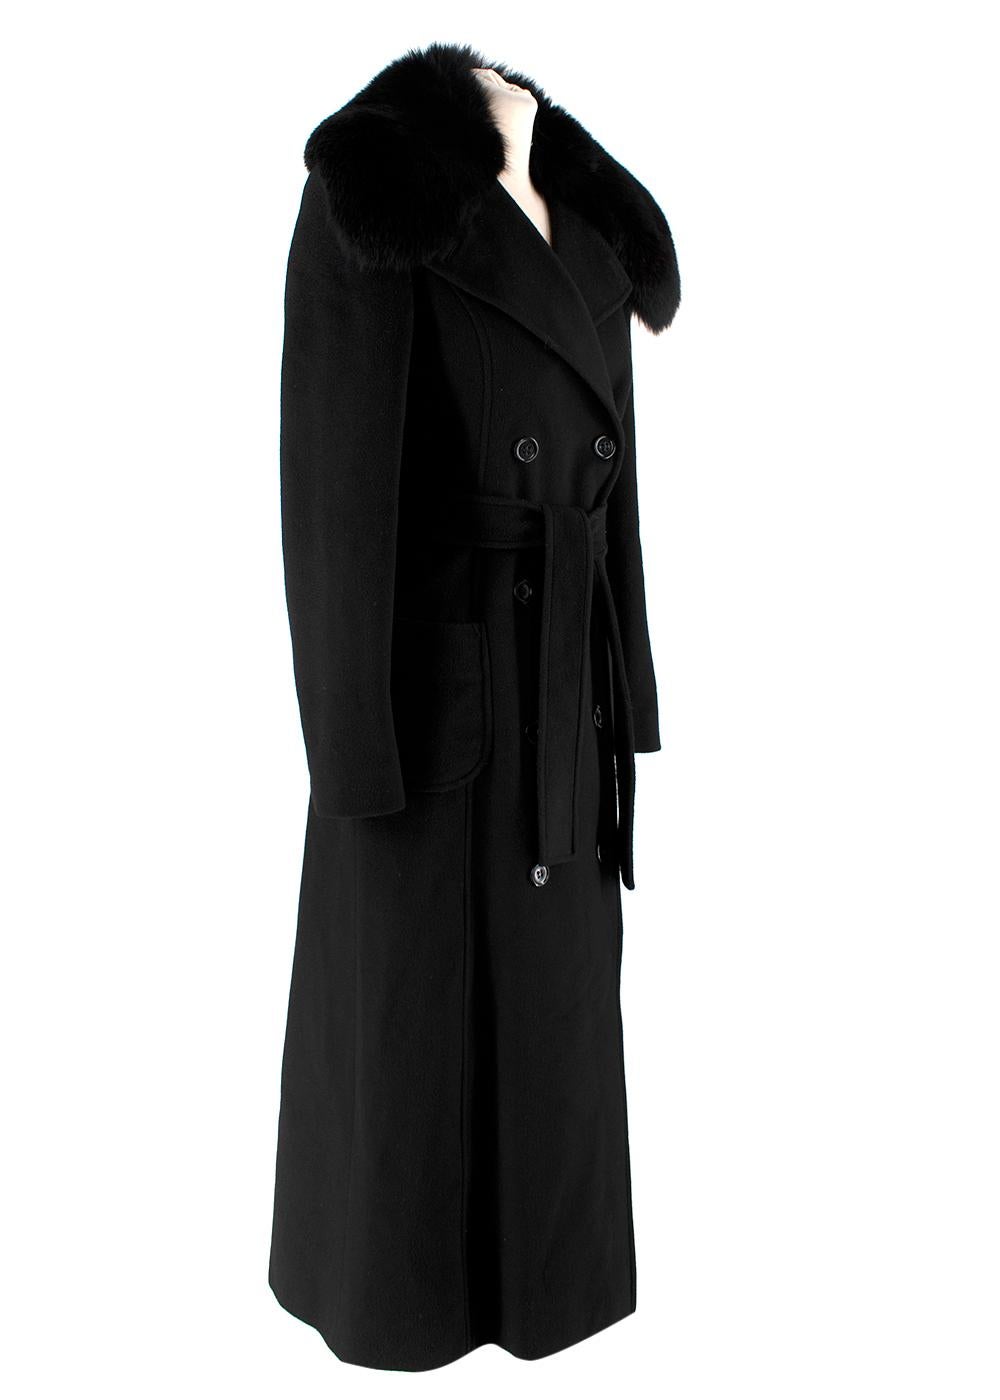 Valentino Double-Breasted Long Cashmere Coat with Mink Collar

- Beautifully cut, longline coat in cashmere felt
- Full skirted hemline
- Double-breasted bodice with notch lapels trimmed in sumptuous mink fur
- Self-tie waist belt
- Two front